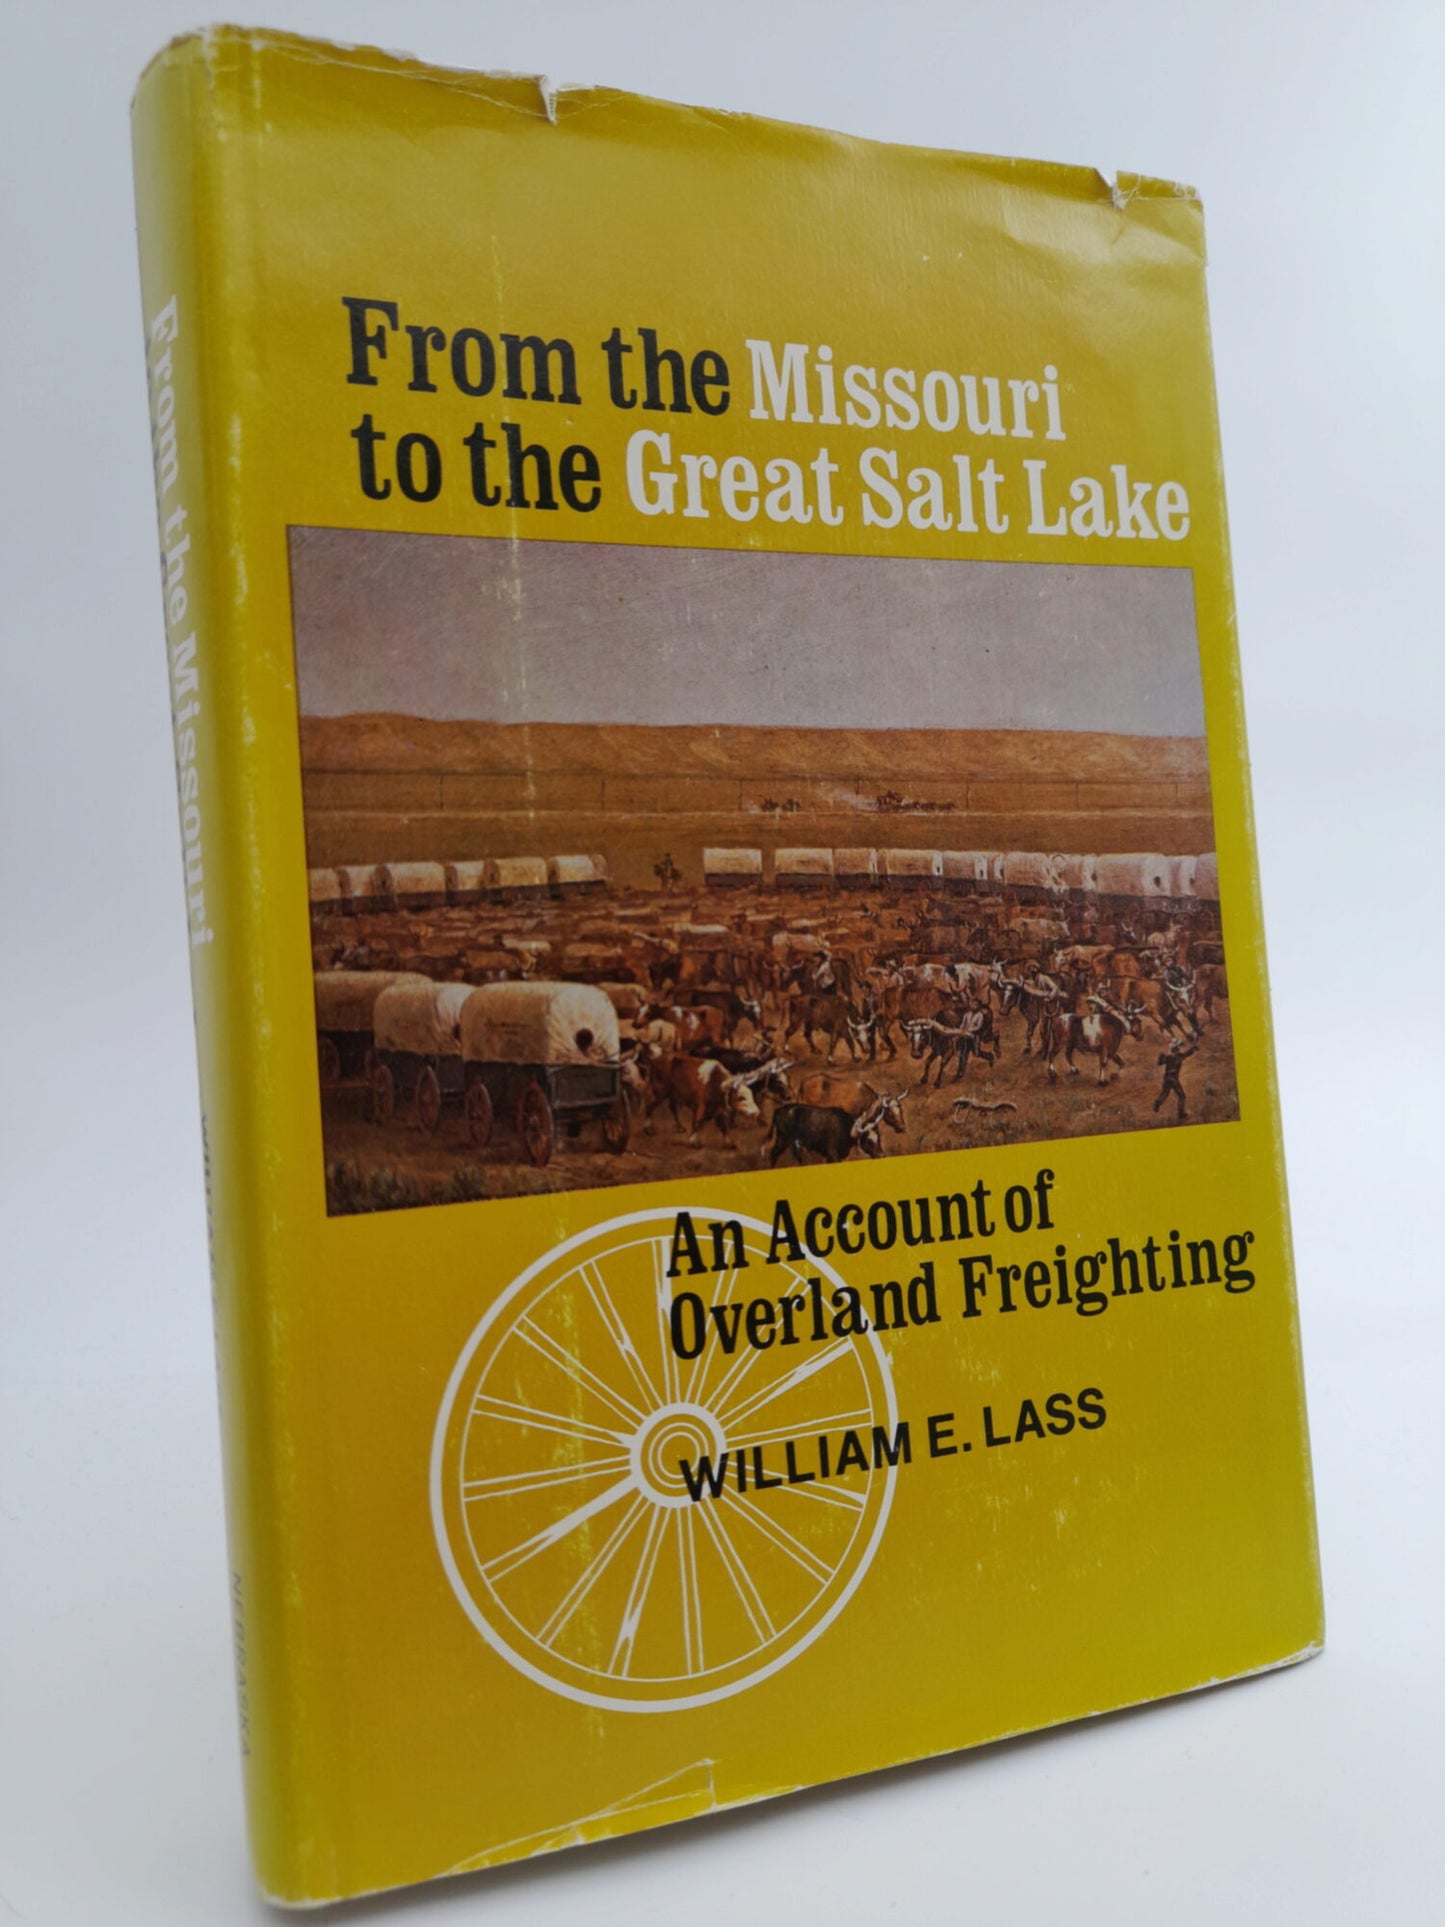 Lass, William E. | From the Missouri to the Great Salt Lake : An account of Overland Freighting